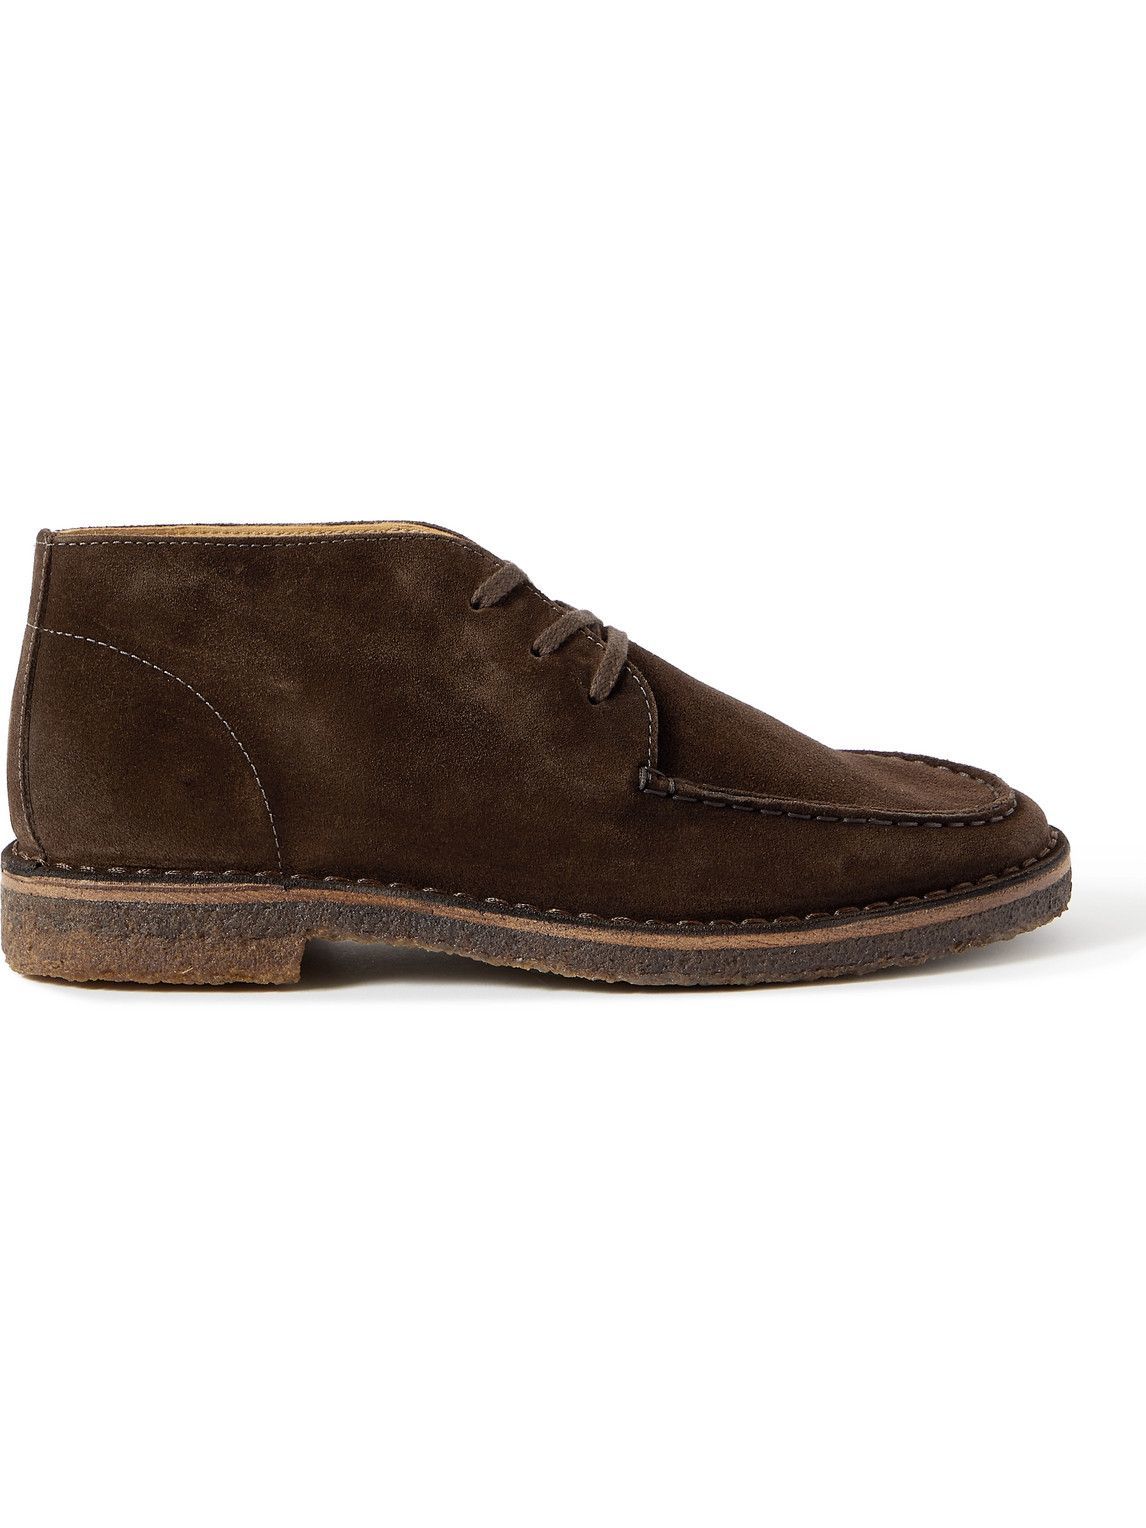 Drake's - Crosby Suede Desert Boots - Brown Drake's